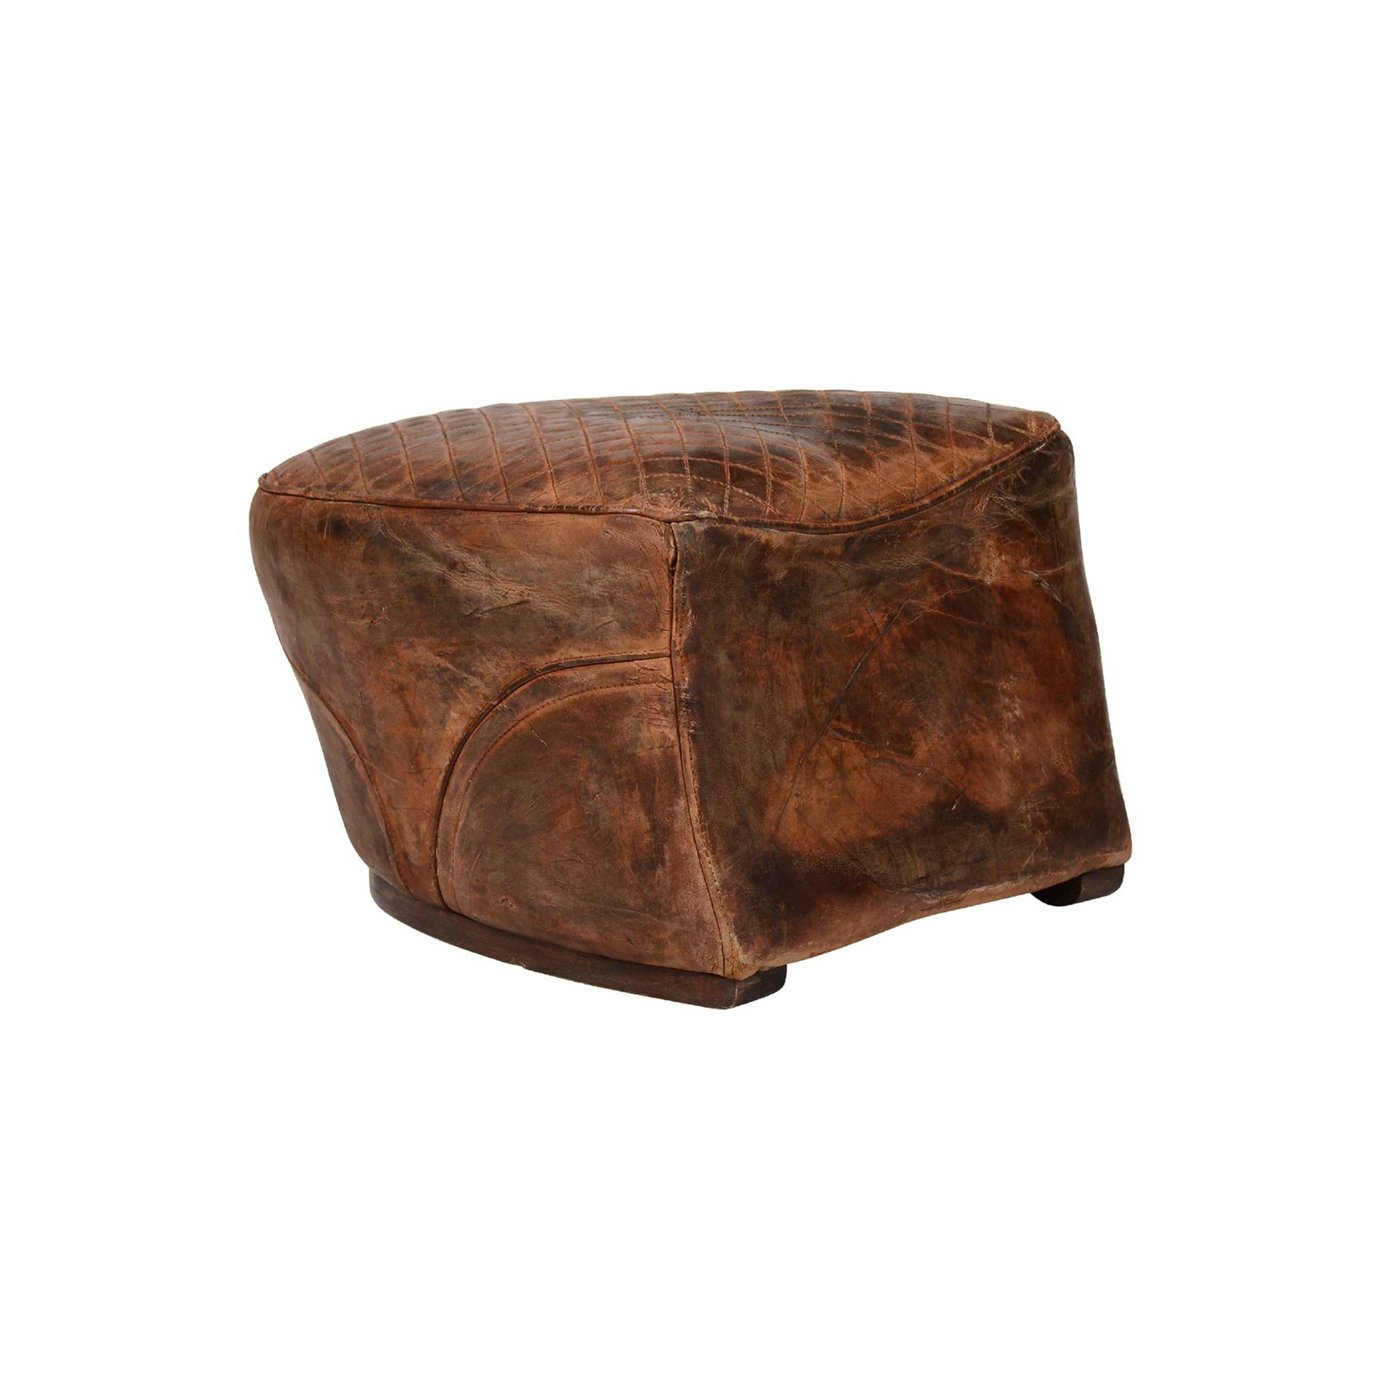 Timothy Oulton Saddle Footstool, Brown Leather | Barker & Stonehouse